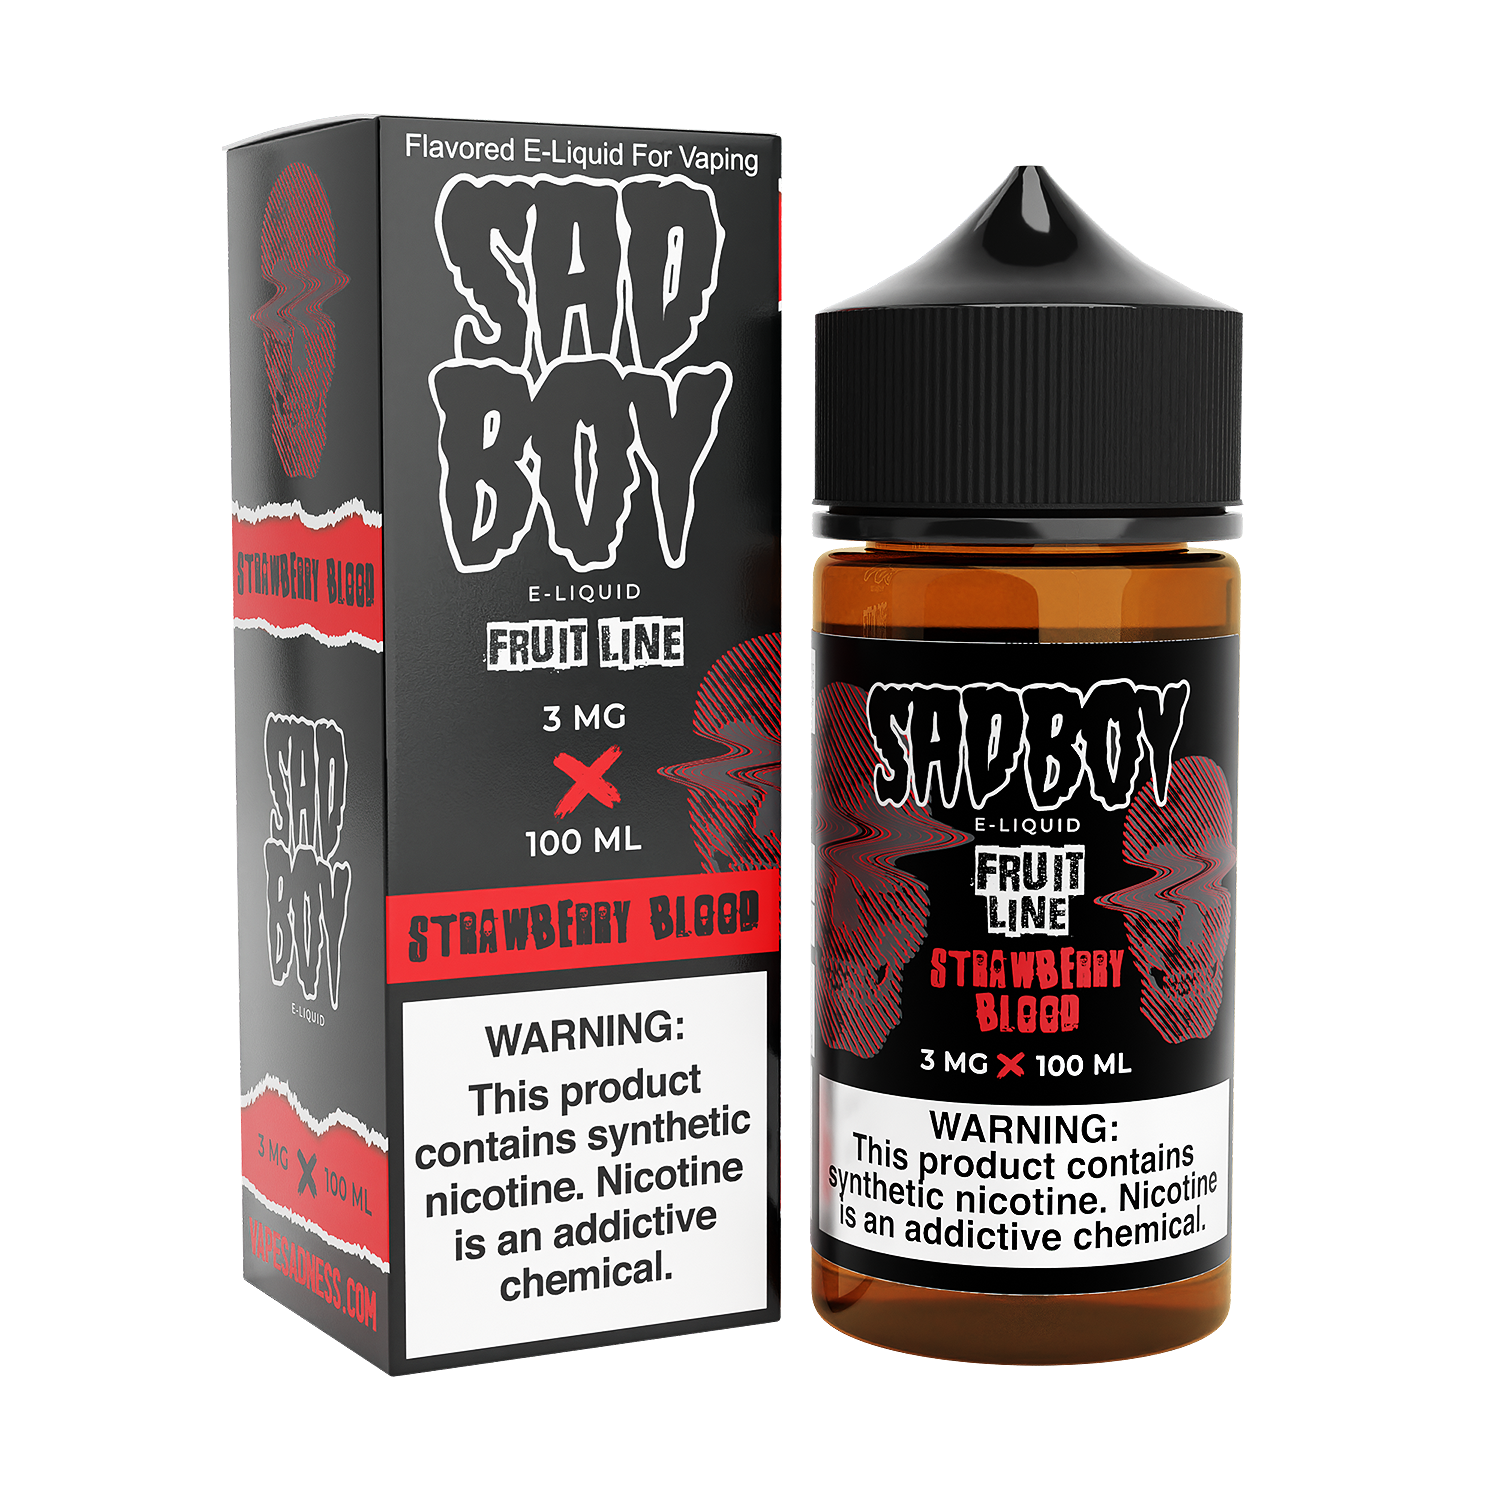 Strawberry Blood by Sadboy E-Liquid 100ml with packaging